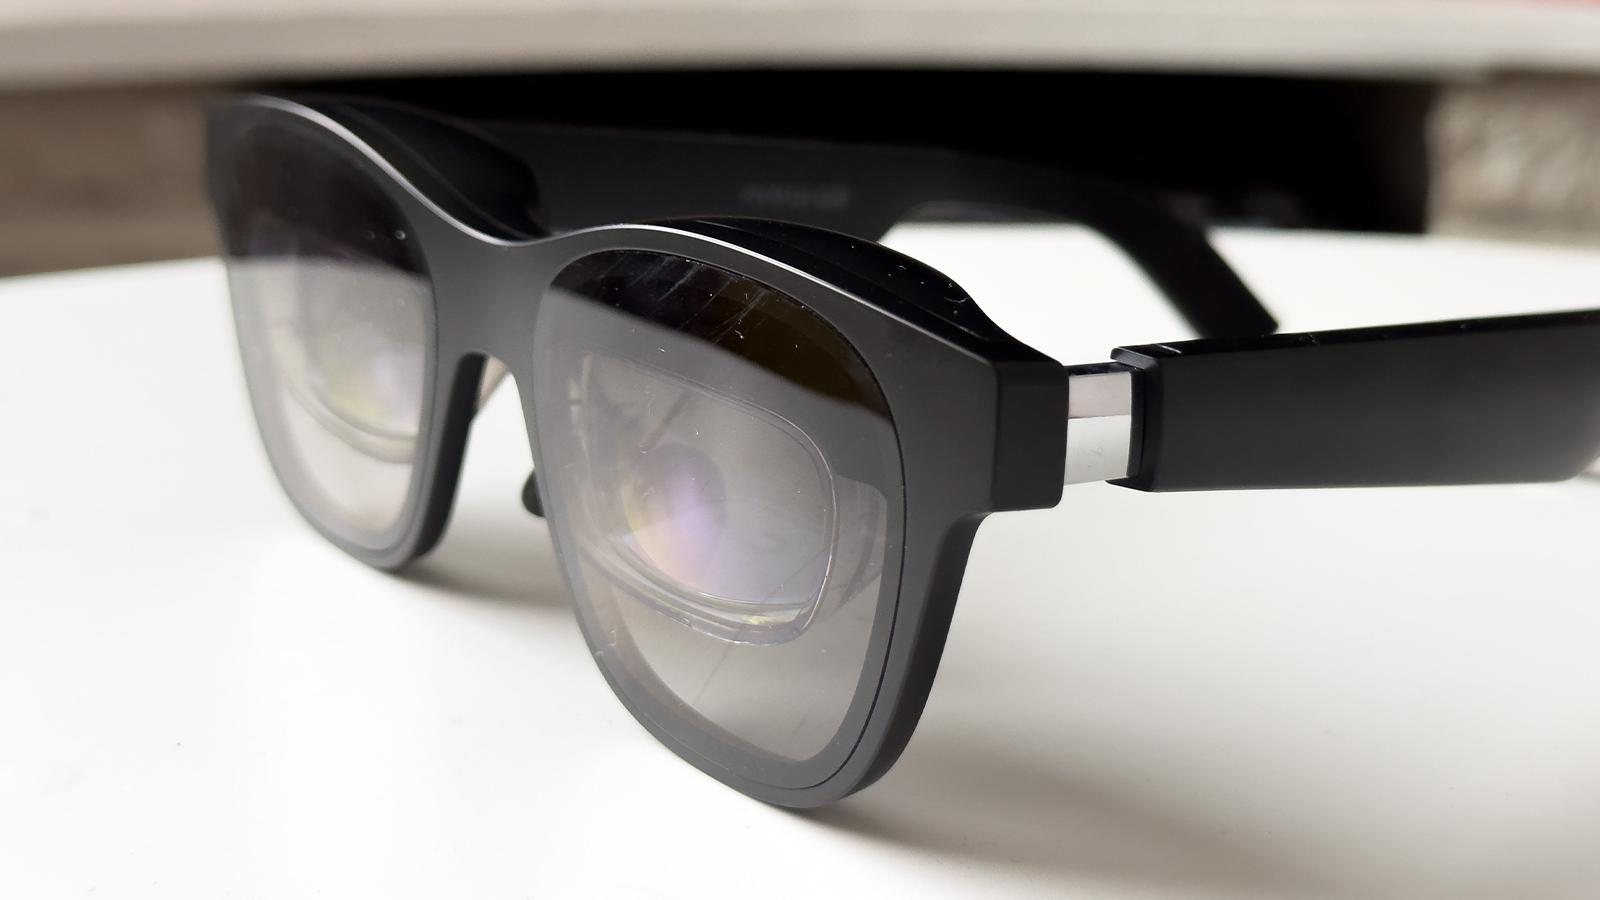 XREAL Air AR glasses review: Cool and futuristic, but too many